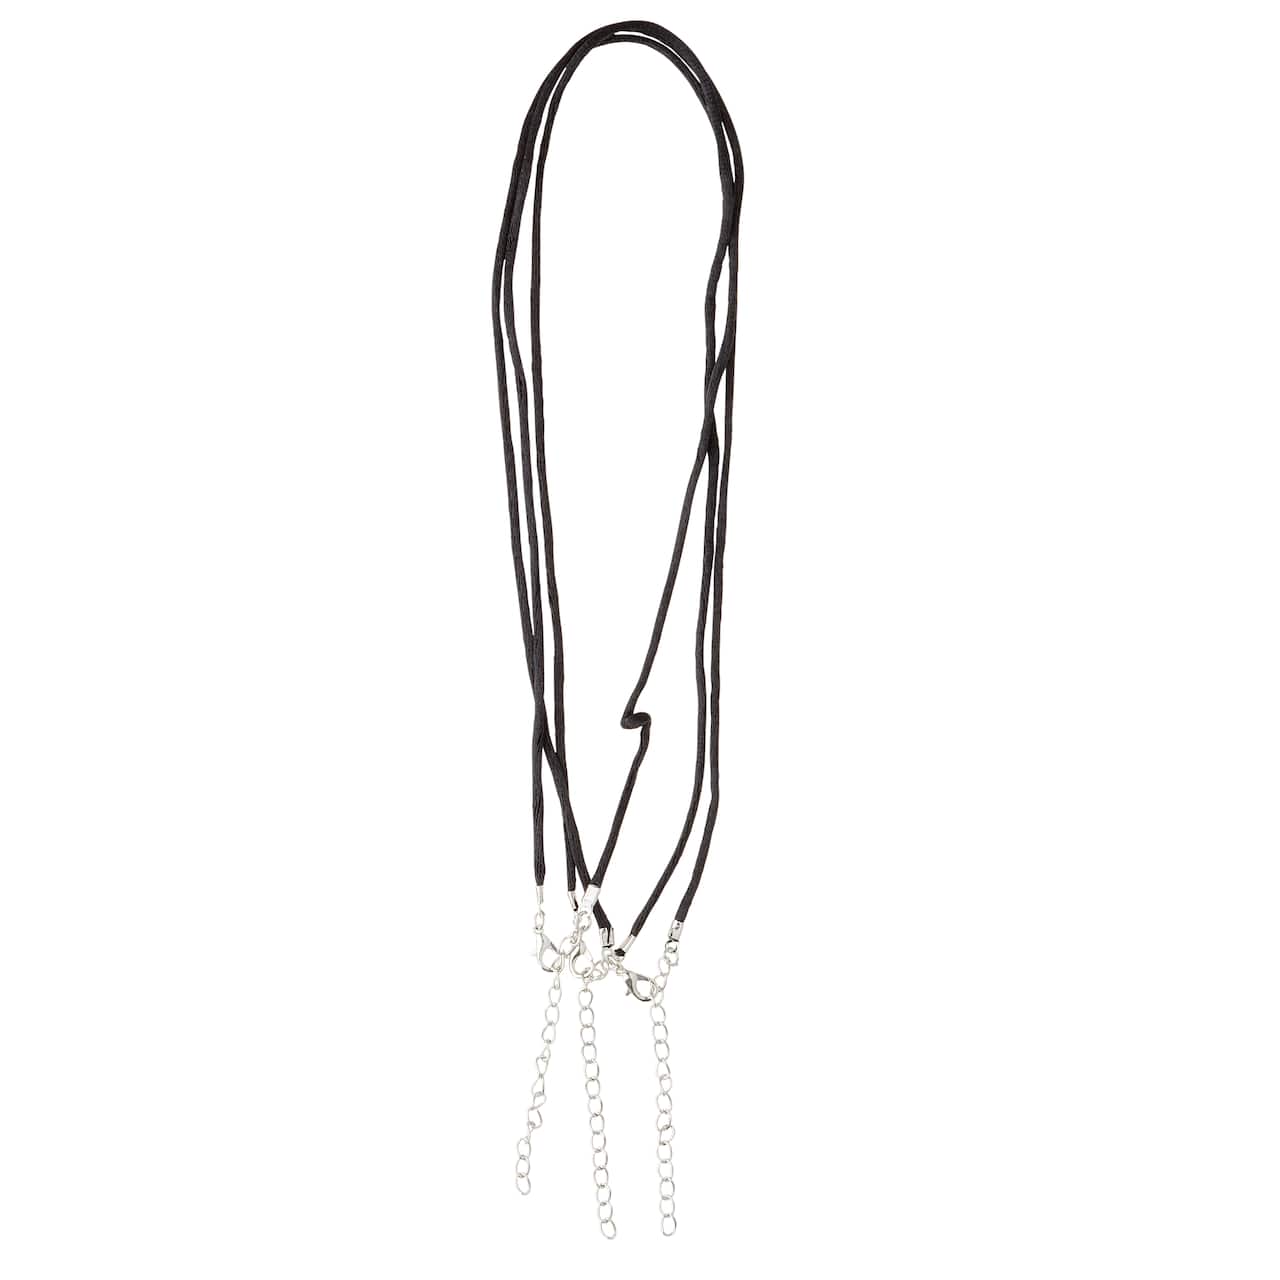 12 Packs: 3 ct. (36 total) Black Nylon Cording Necklace by Bead Landing&#x2122;